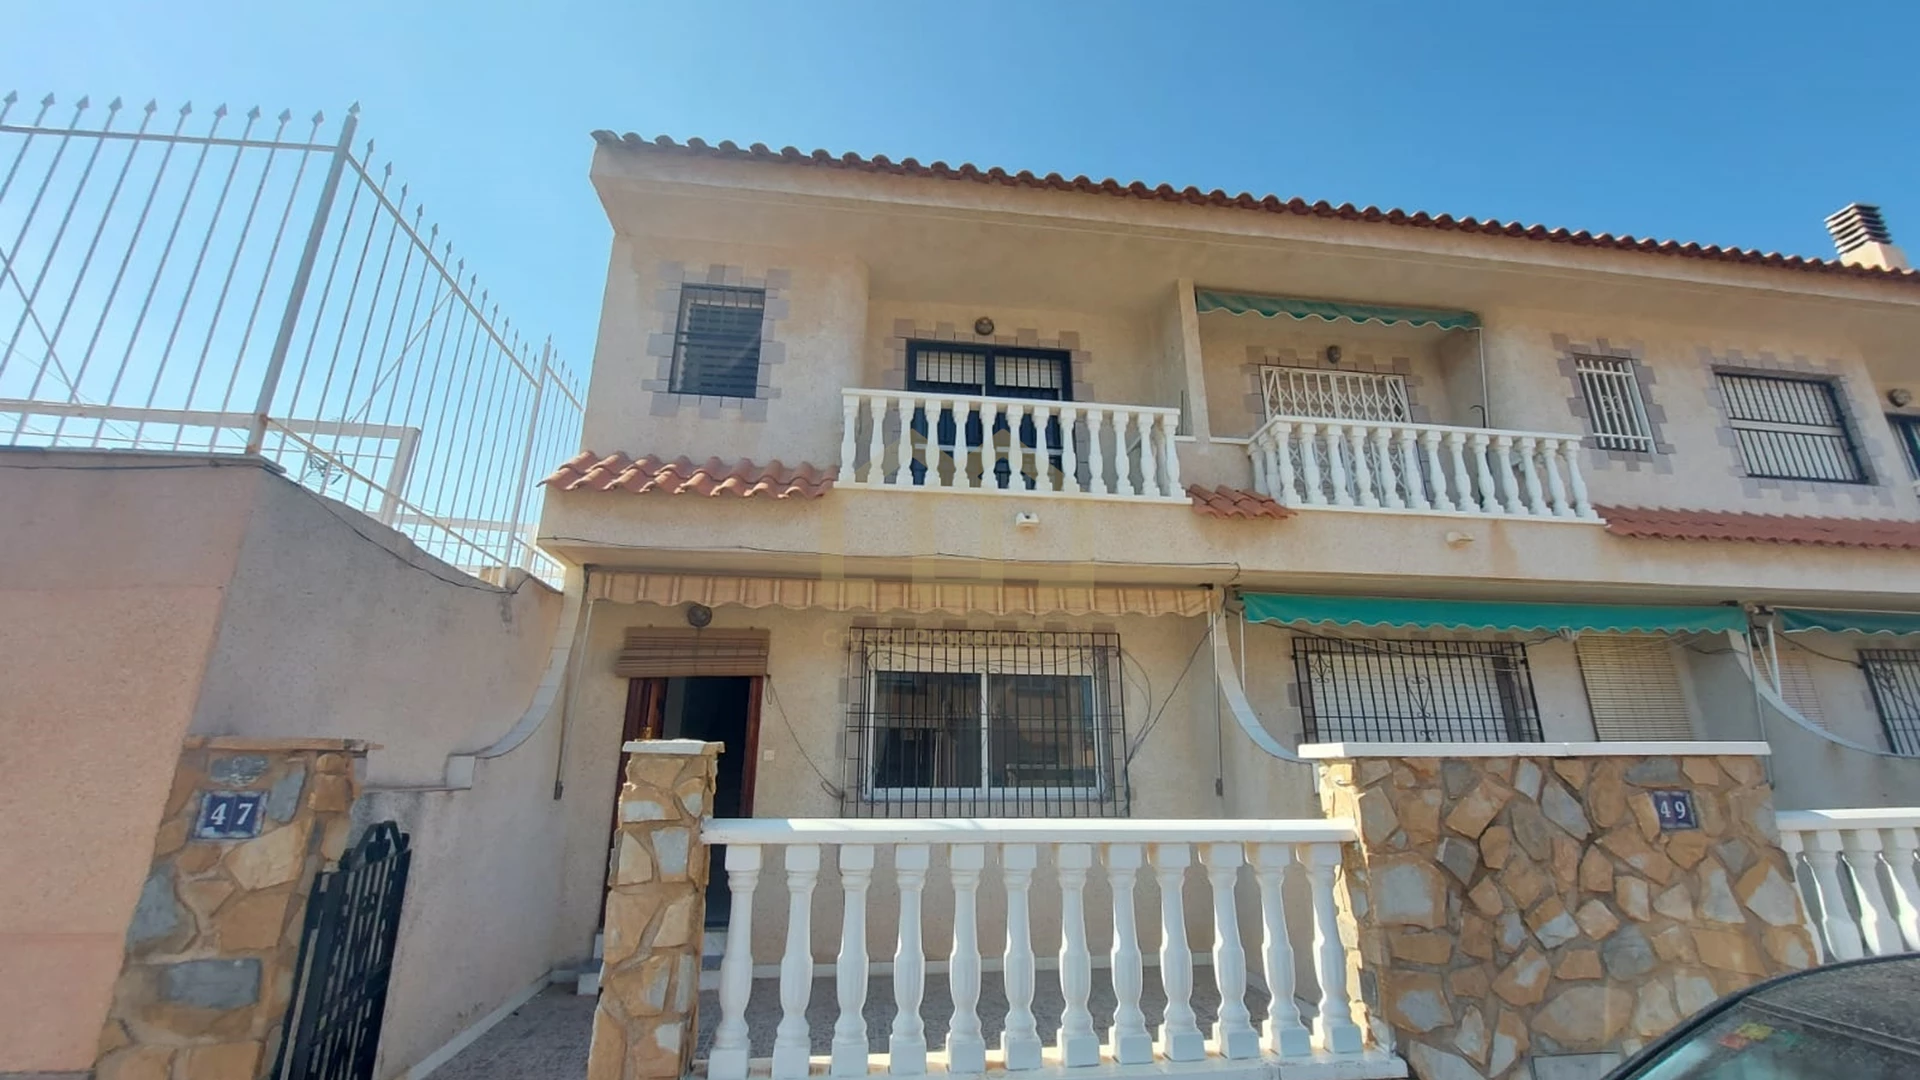 San Pedro del Pinatar, San Pedro del Pinatar, Duplex apartment, CPL1/LB02, Townhouse with 4 bedrooms just 500 meters from the beach